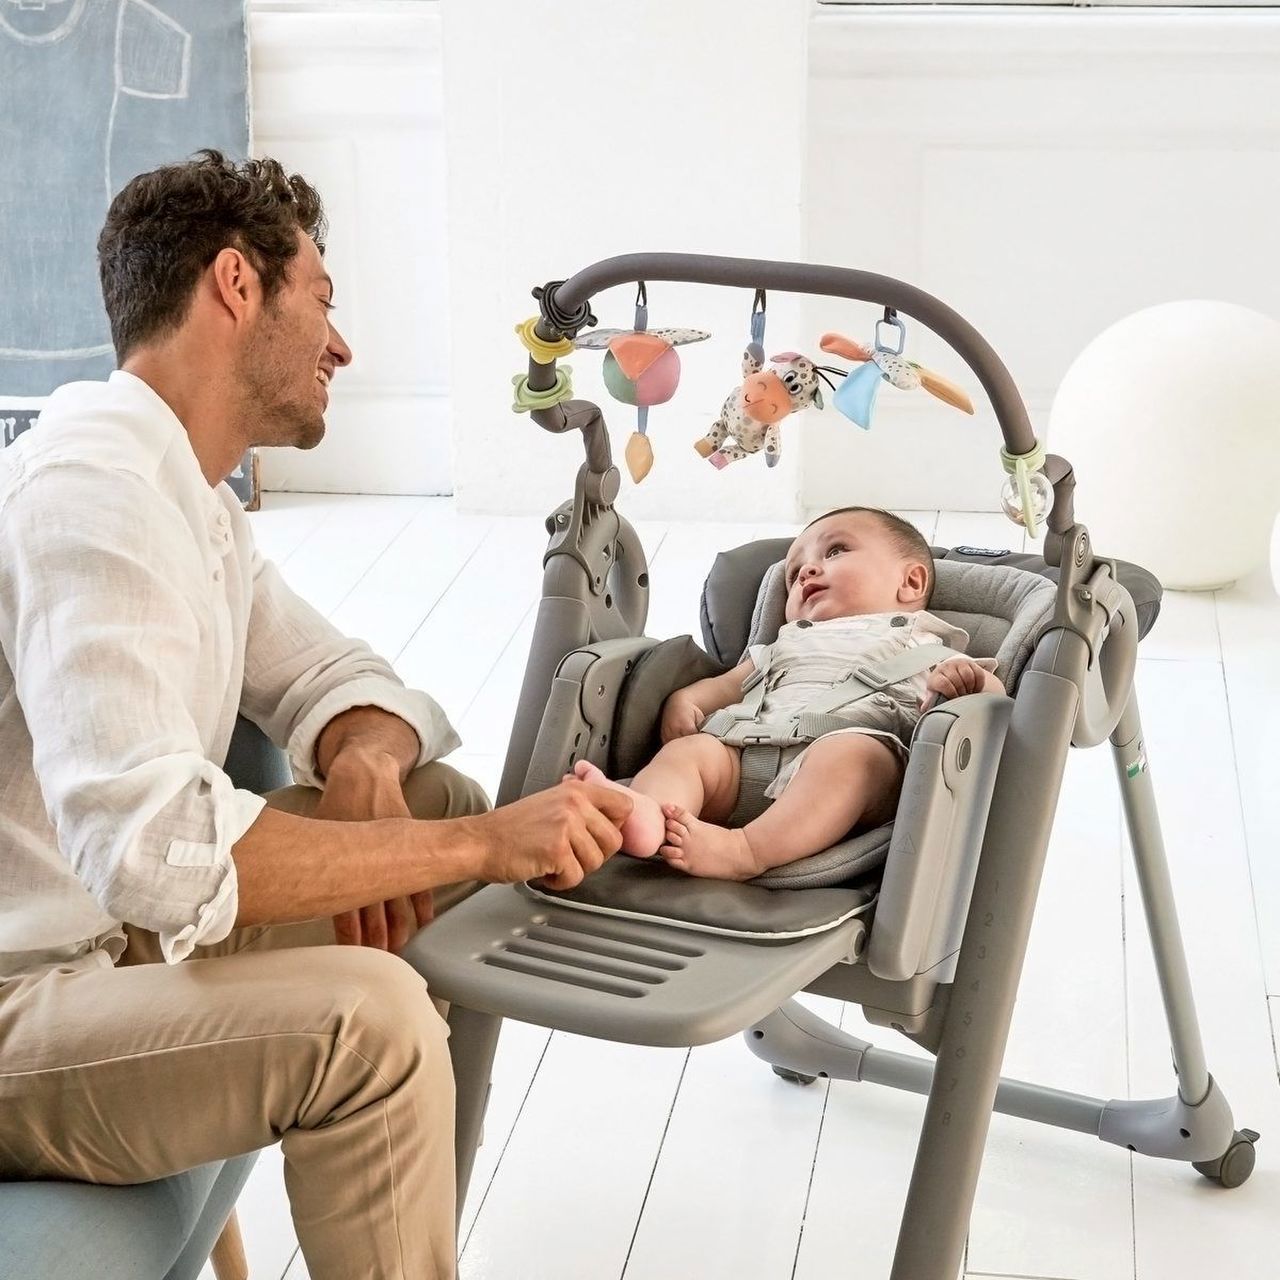 CHICCO POLLY MAGIC RELAX BABY HIGH CHAIR - GRAPHITE